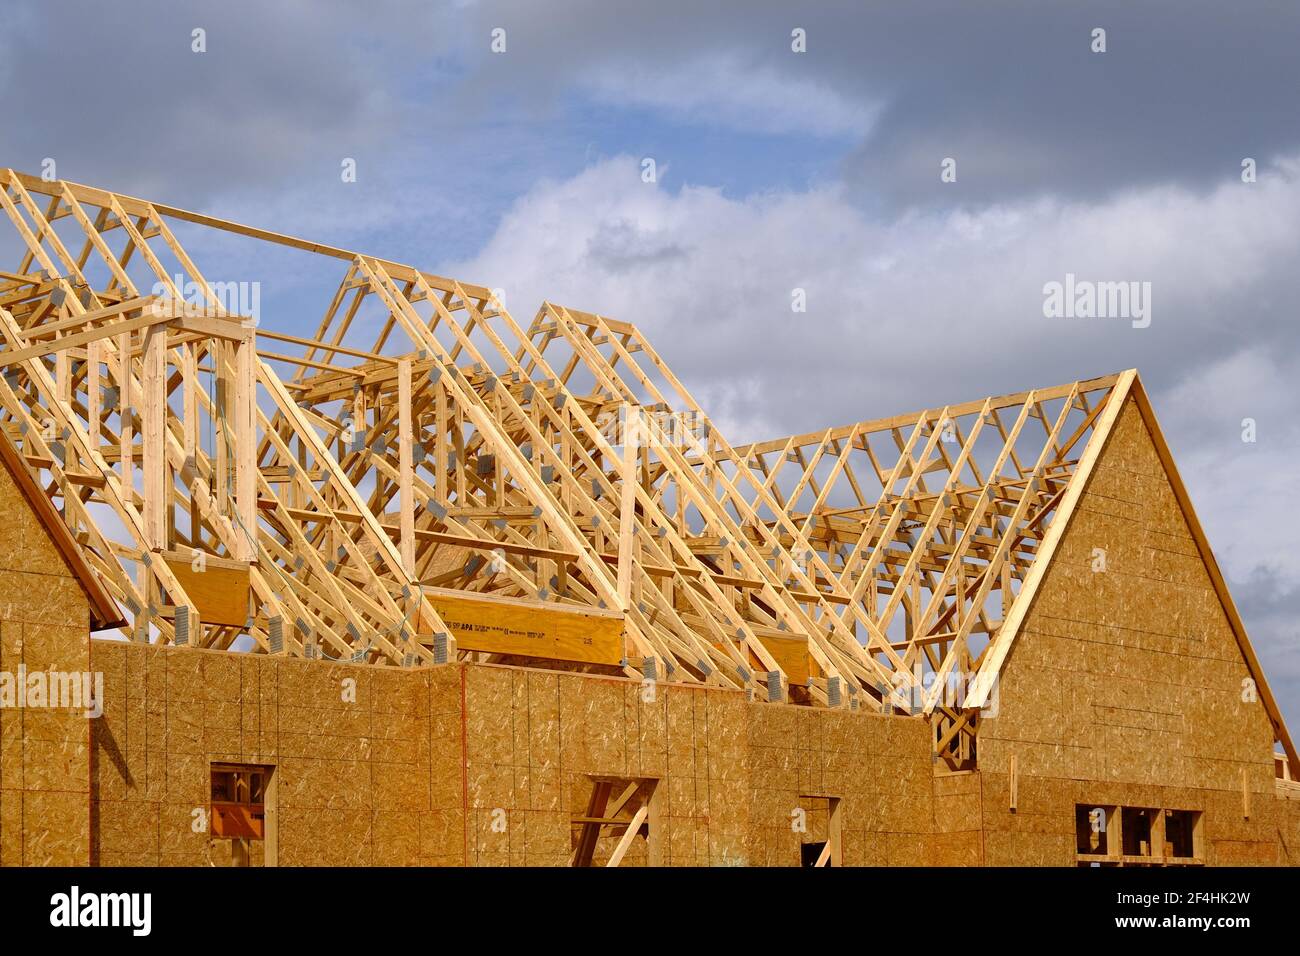 Wood Sheathing and Roof Trusses Stock Photo